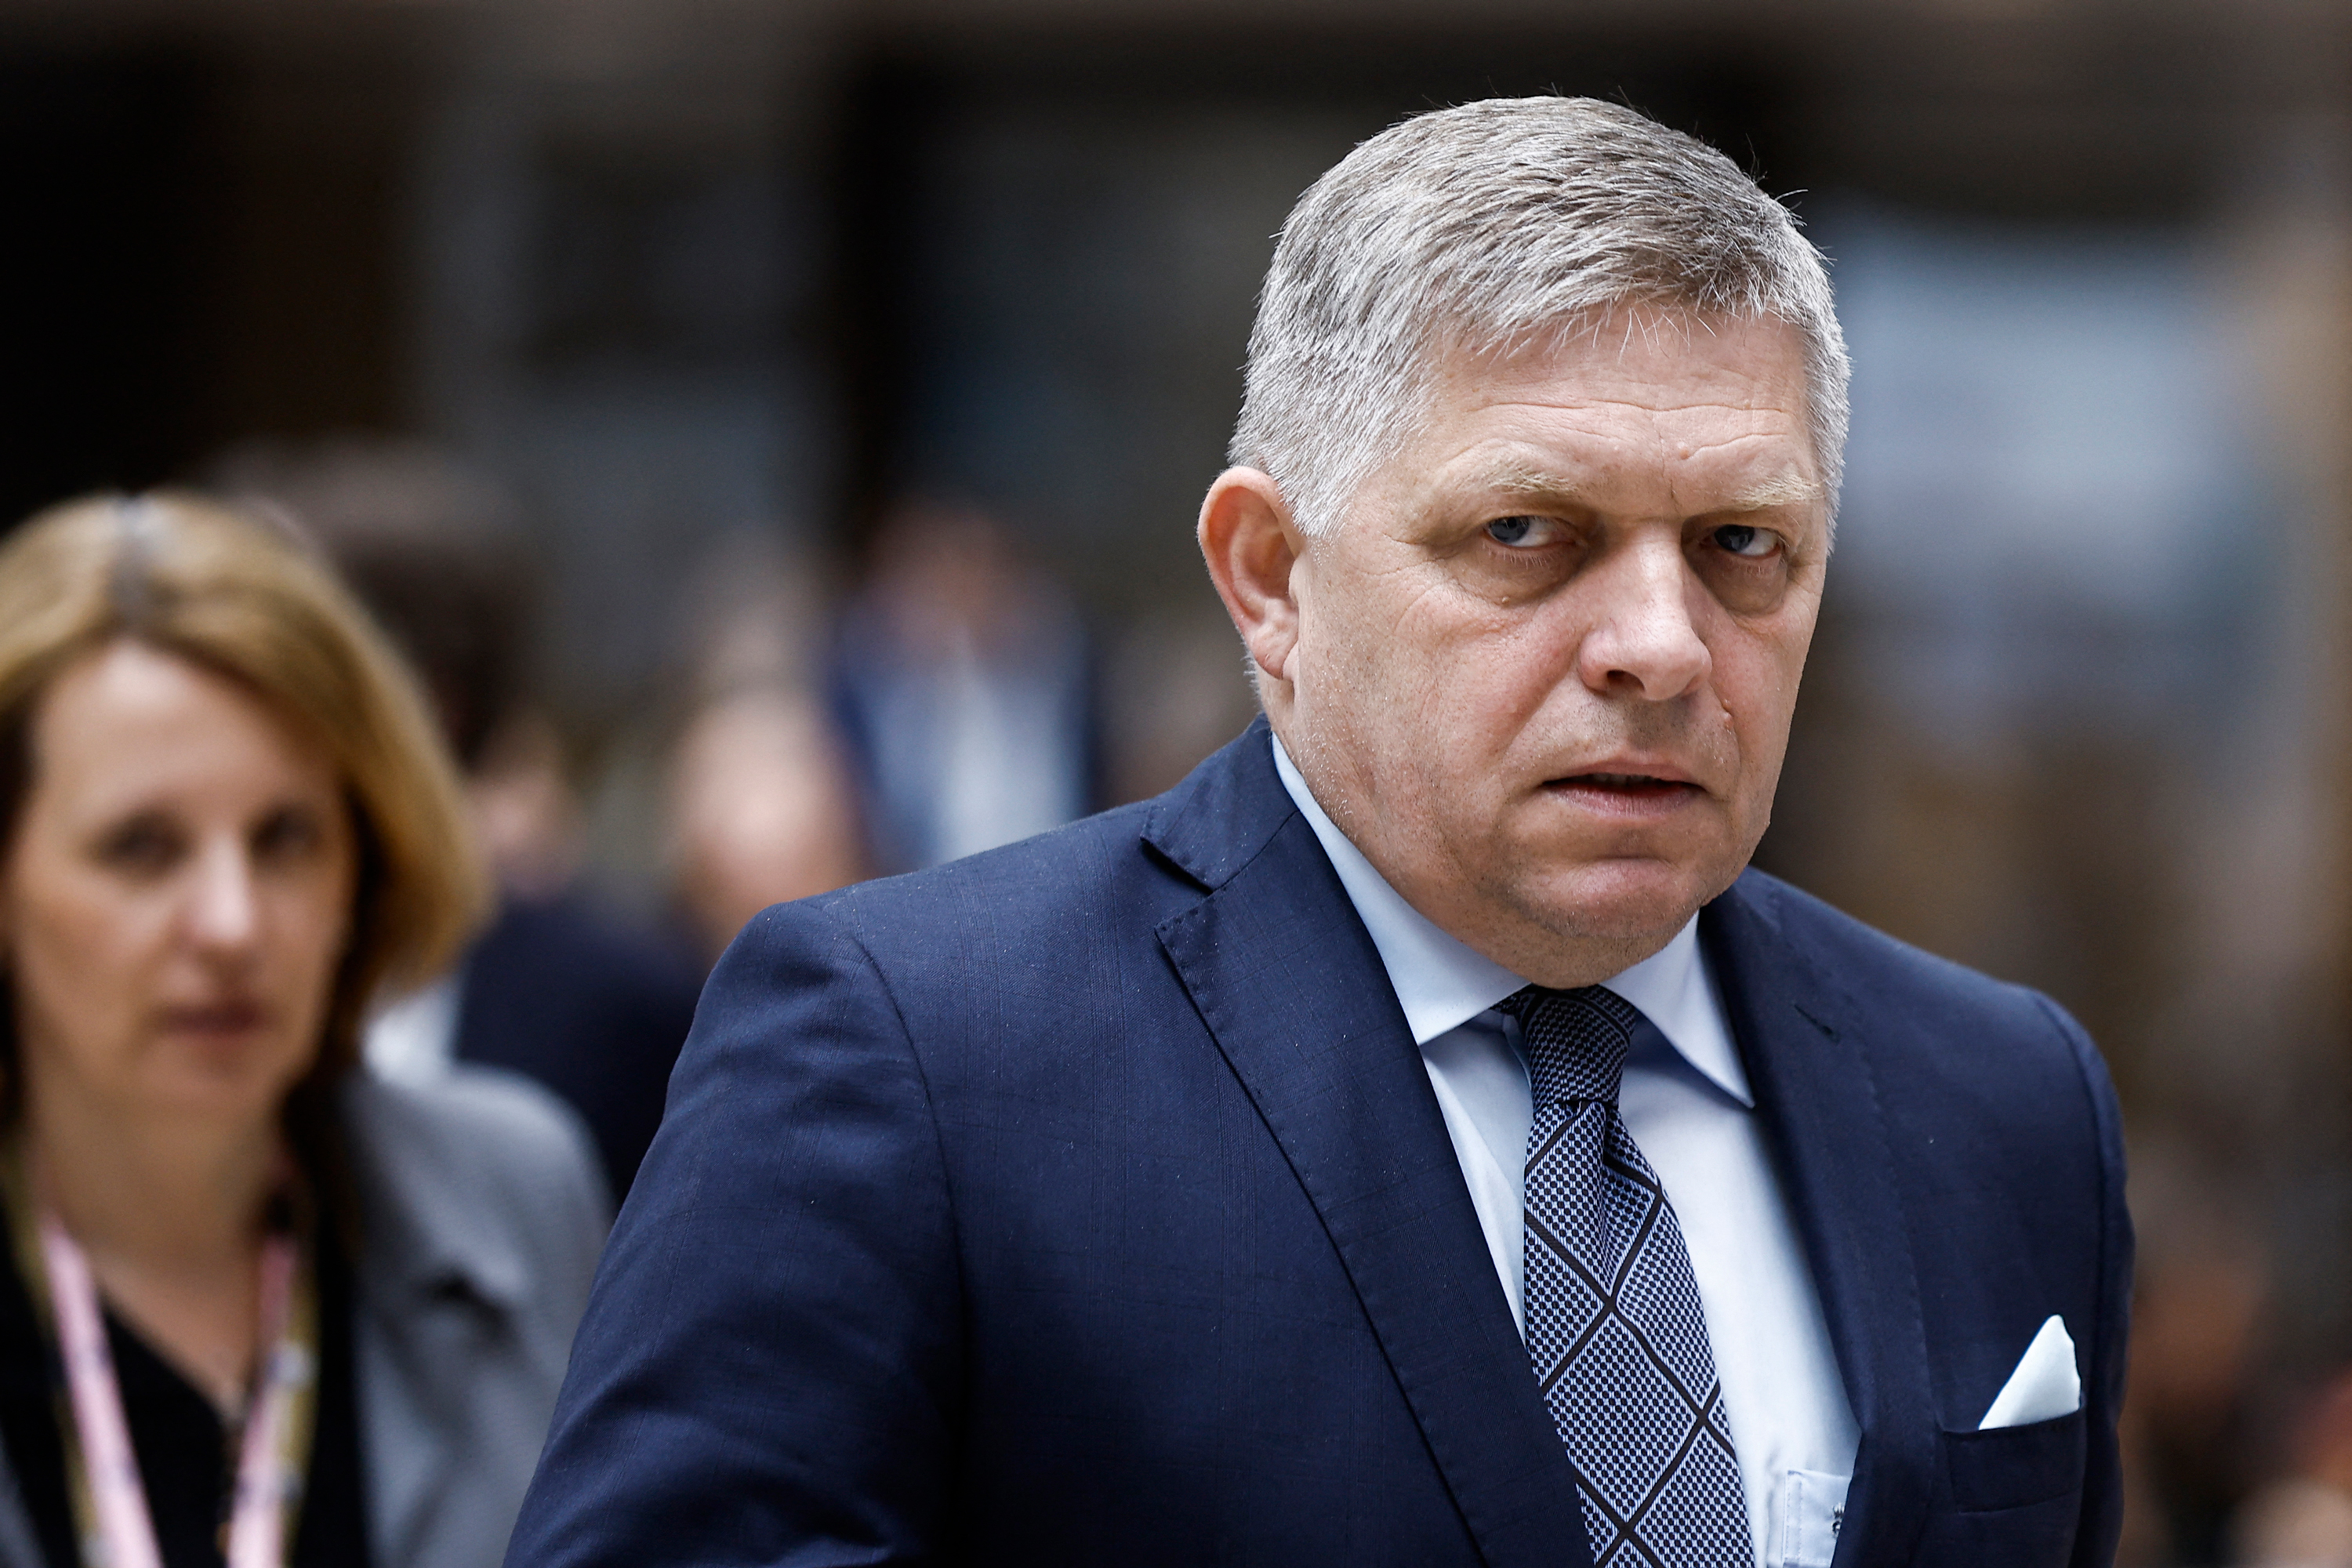 Robert Fico walks during the European Council summit at the EU headquarters in Brussels, on April 18.